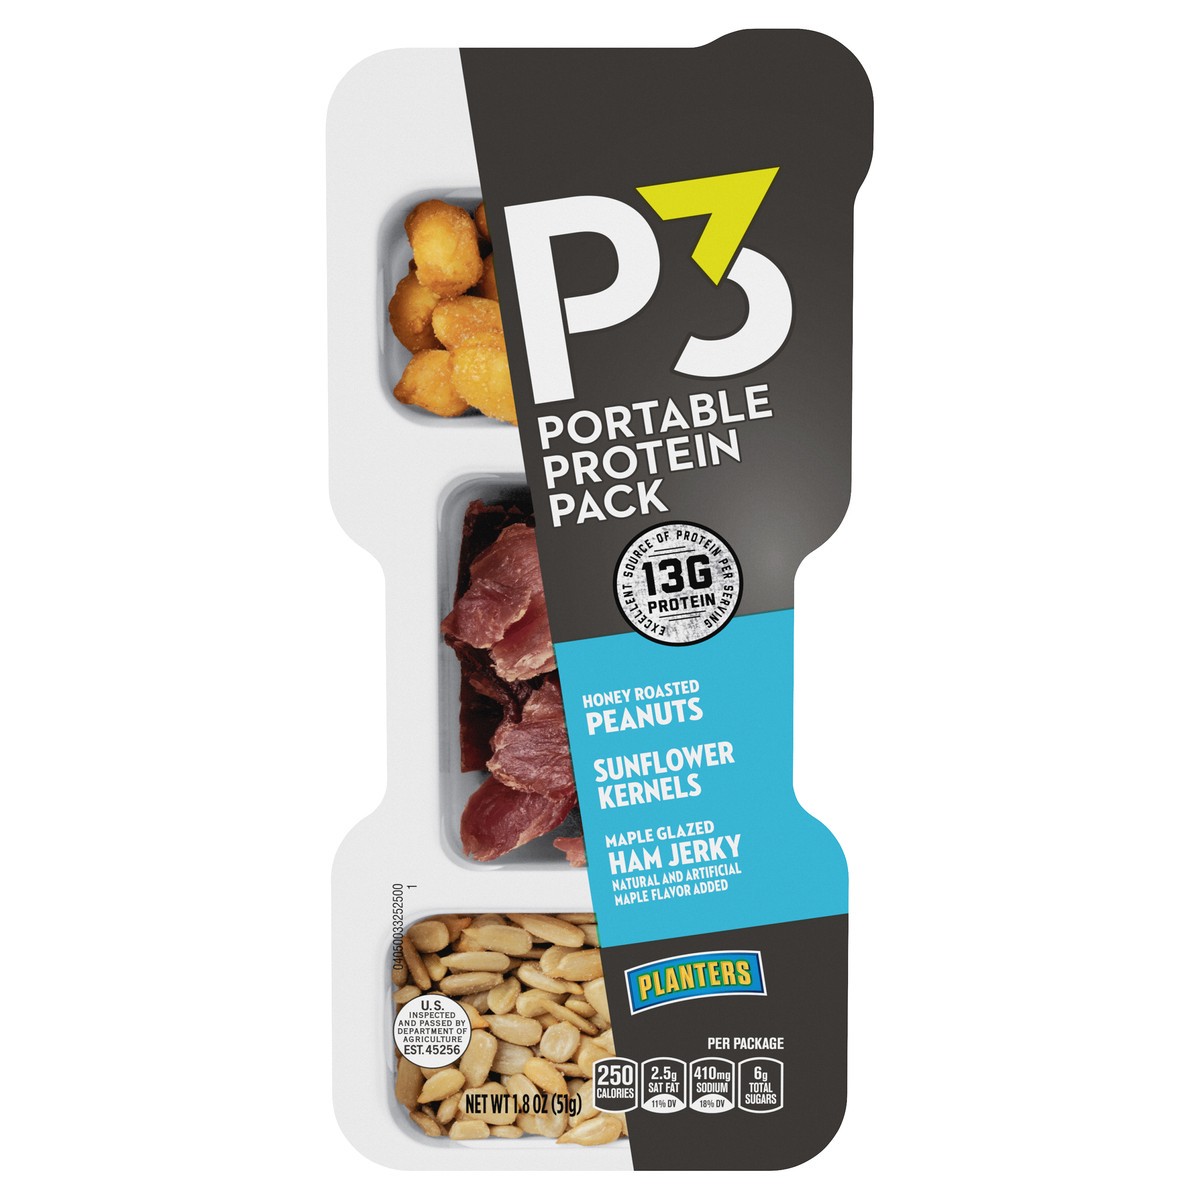 slide 11 of 11, P3 Portable Protein Snack Pack with Honey Roasted Peanuts, Sunflower Kernels & Maple Glazed Ham Jerky Tray, 1.8 oz